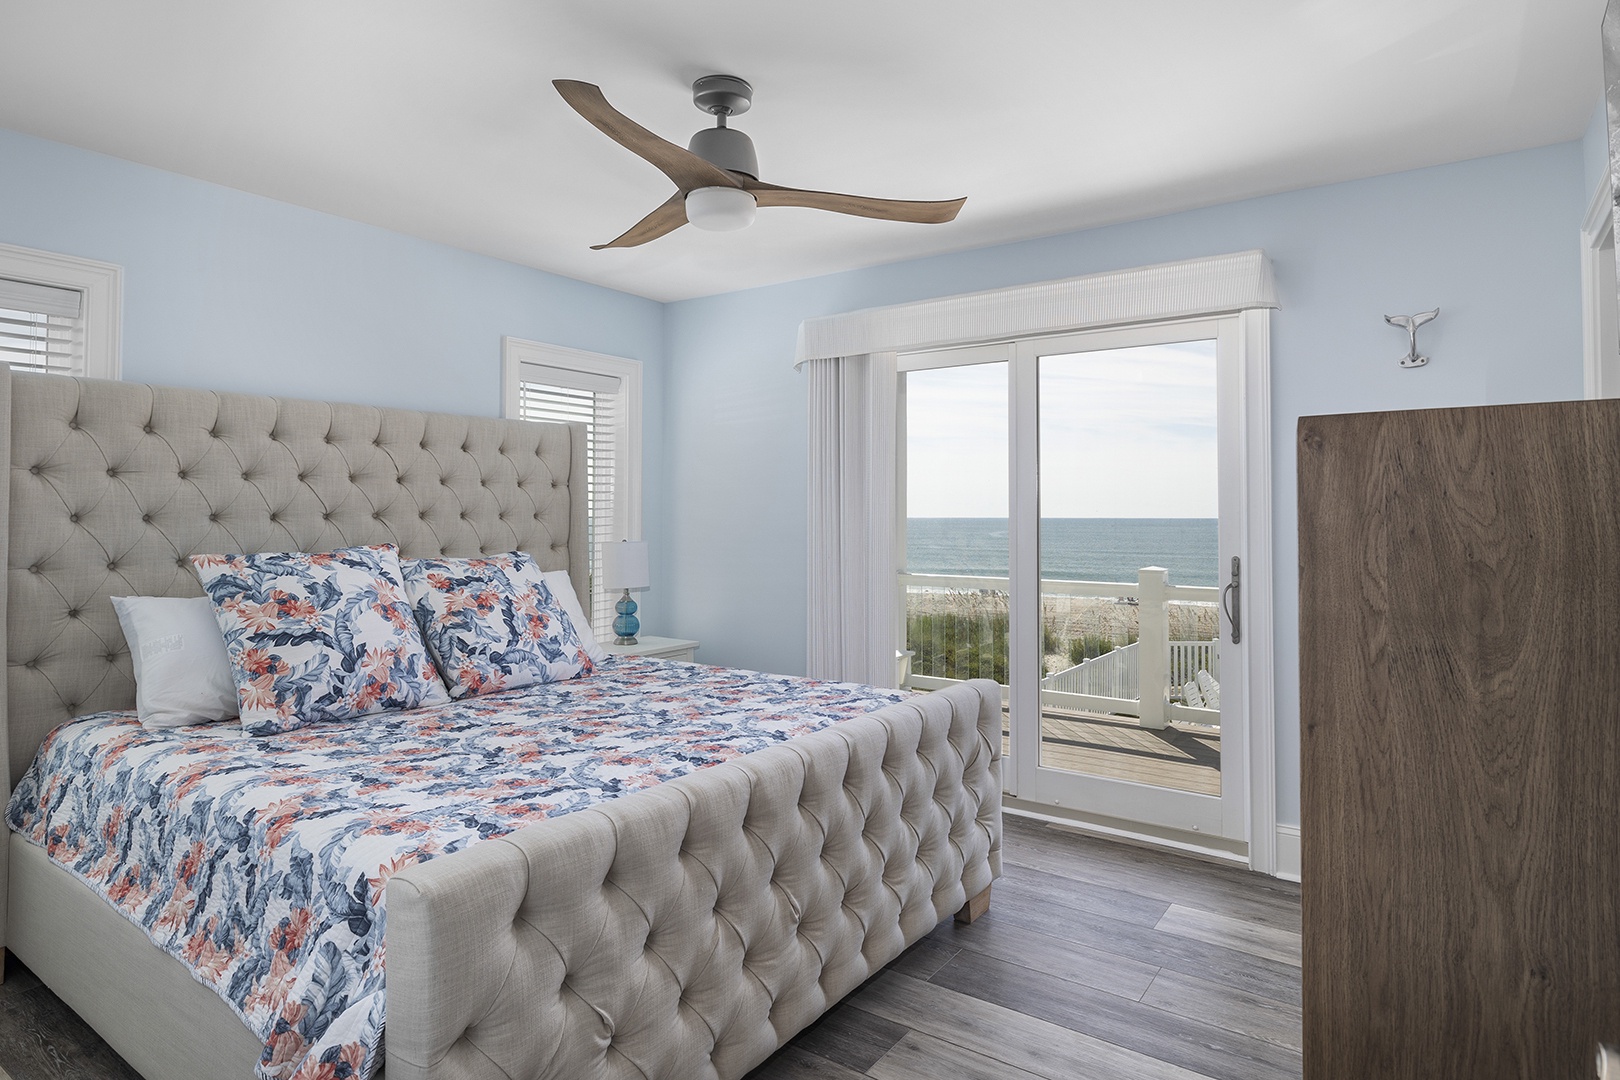 3rd Level Bedroom w/ King Bed, Ocean Views and Balcony Access